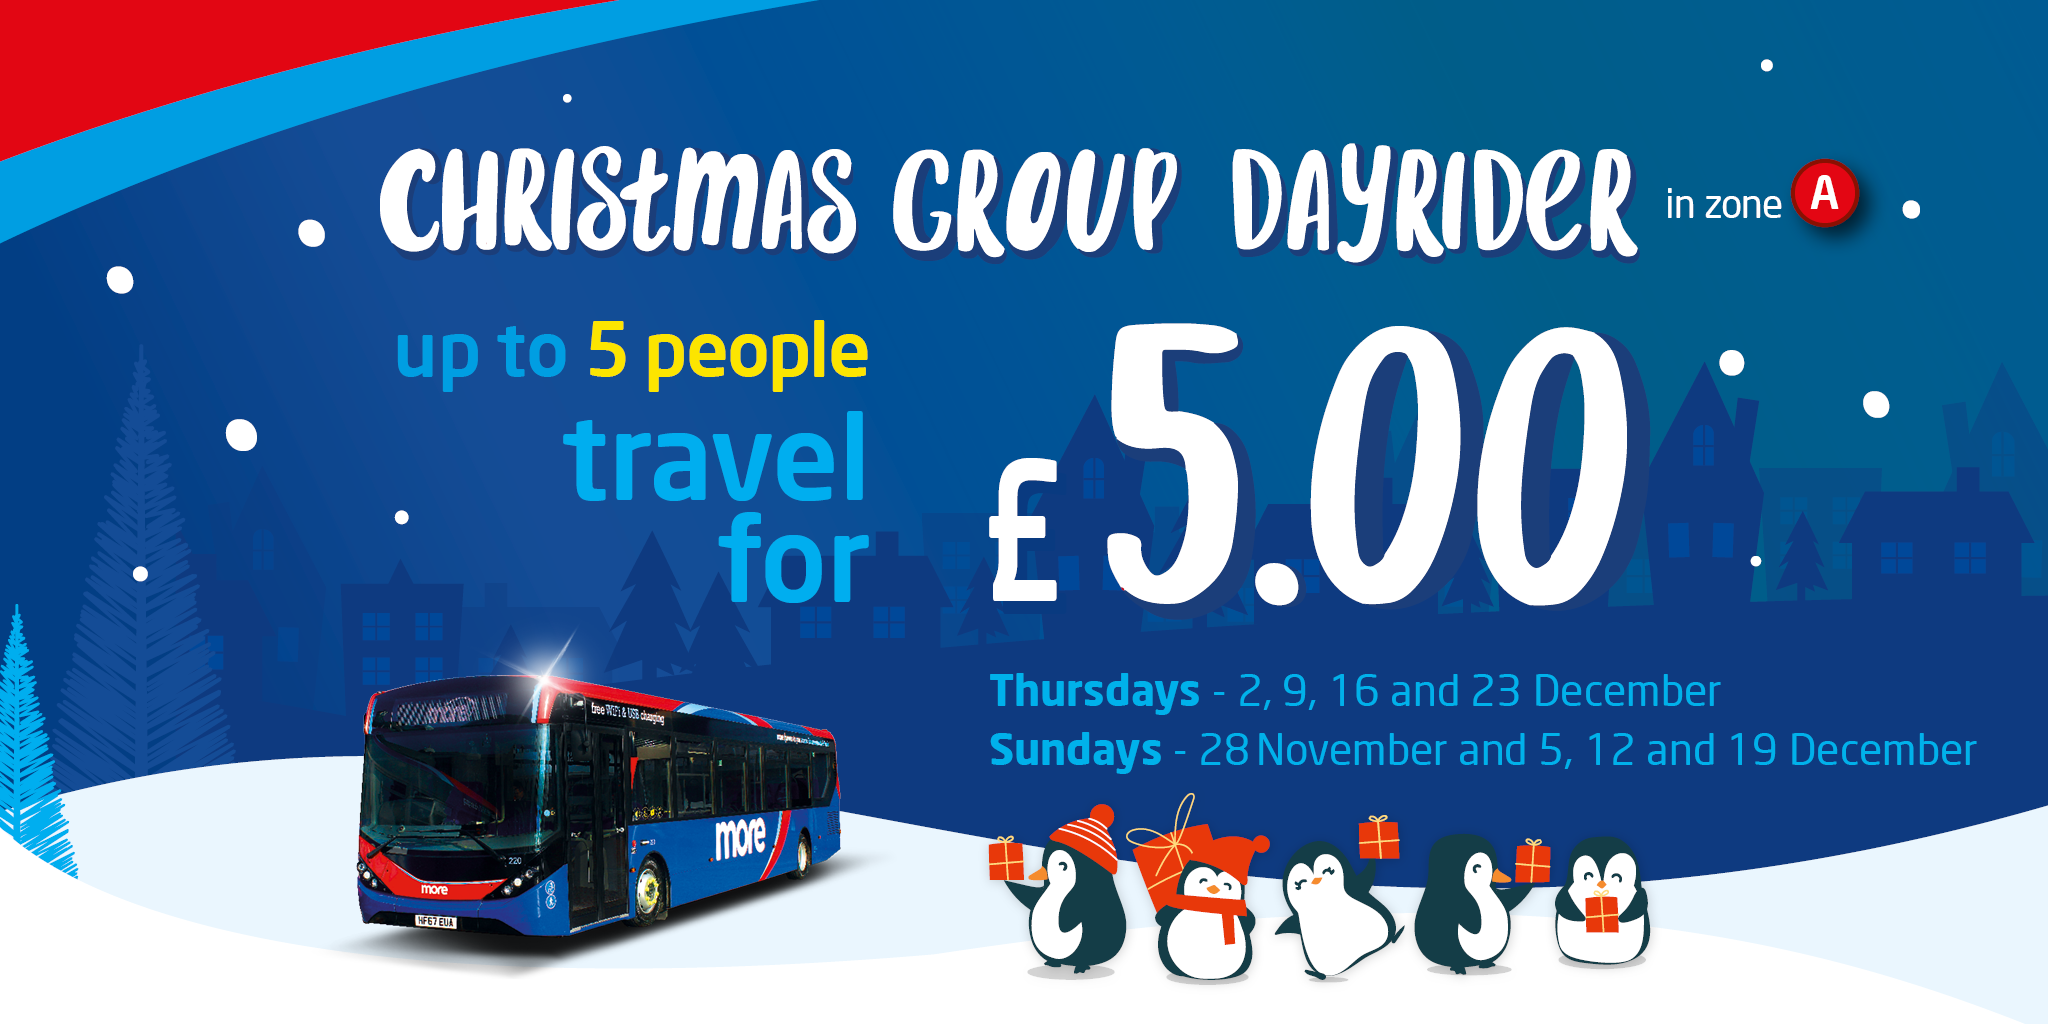 christmas group dayrider in zone a: up to 5 people travel for £5